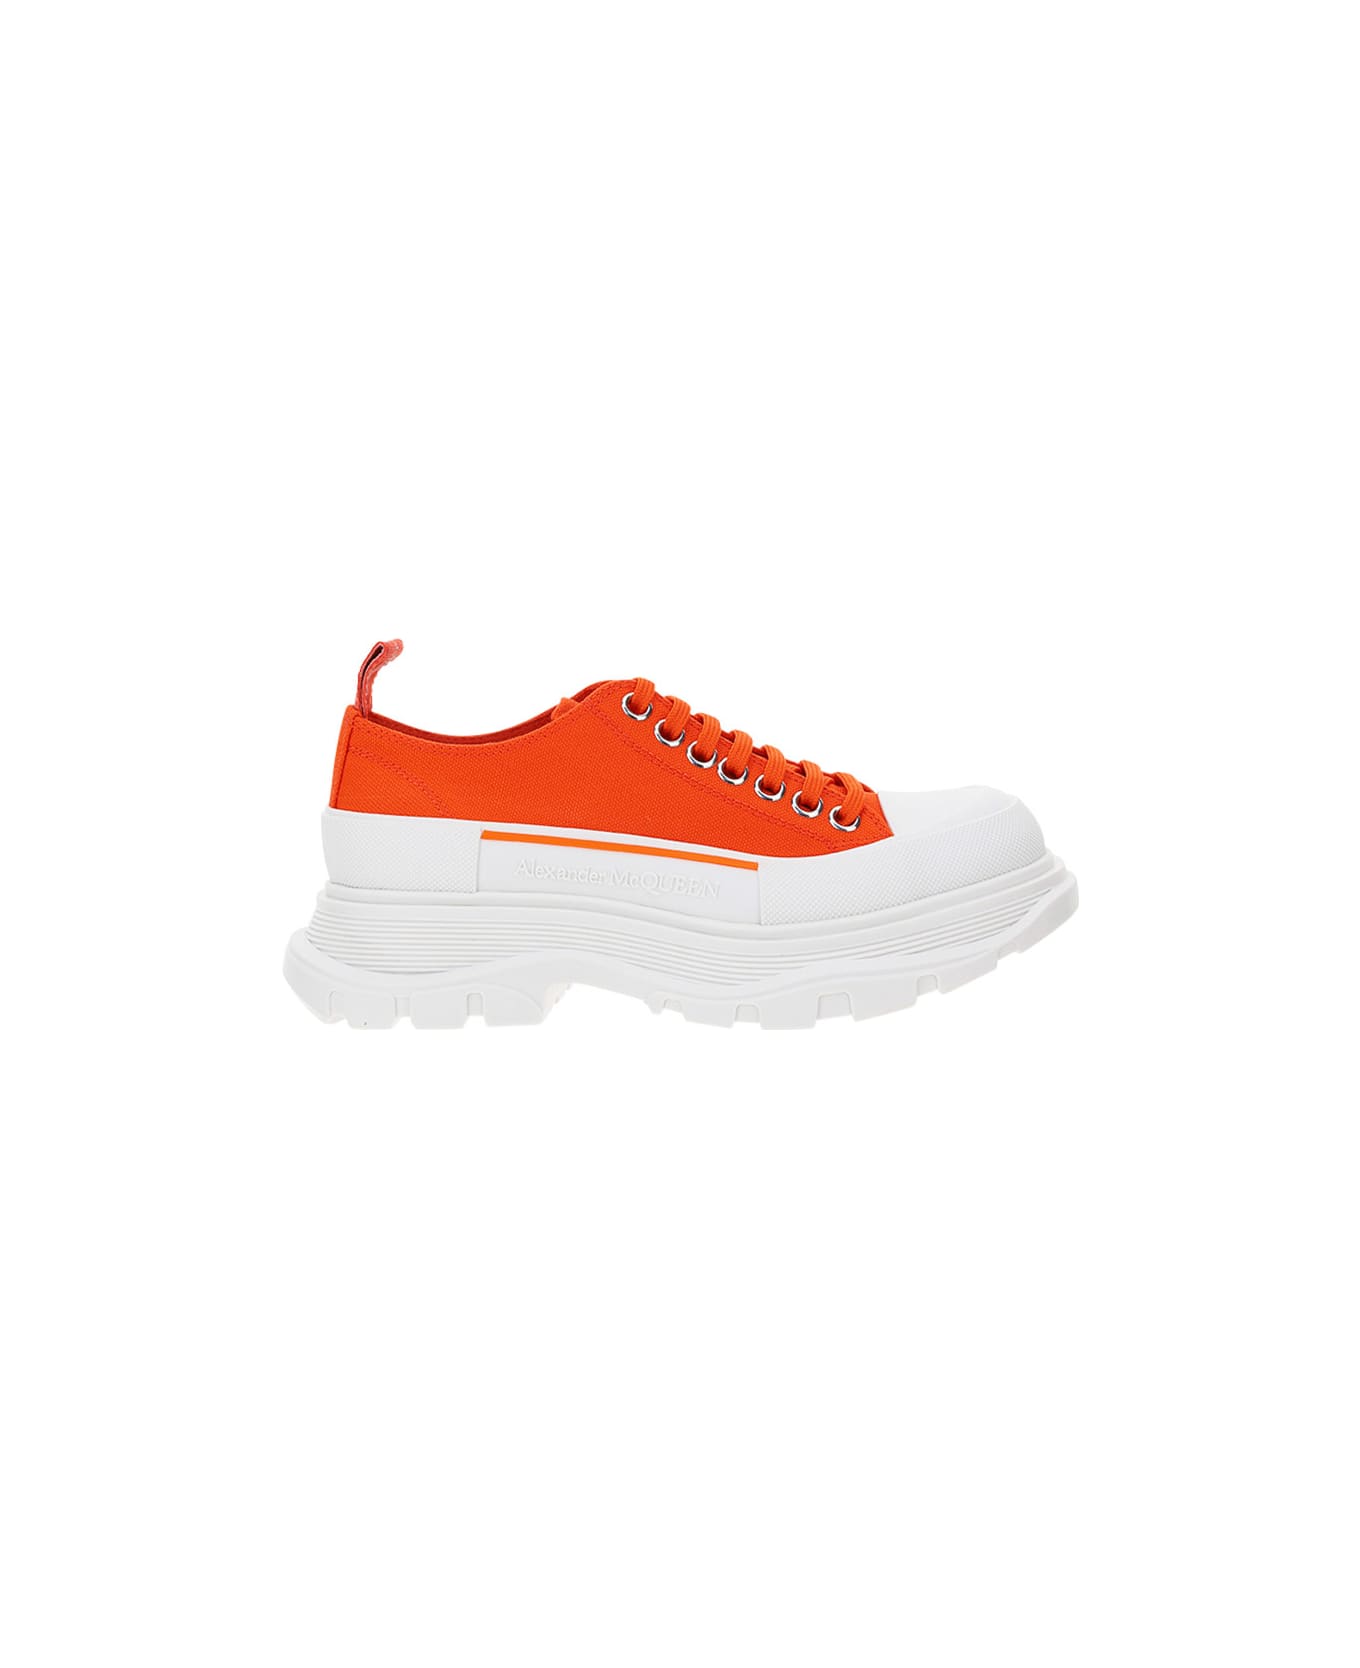 Alexander McQueen Tread Slick Sneakers - Lu.or/of.wh/l.o./si